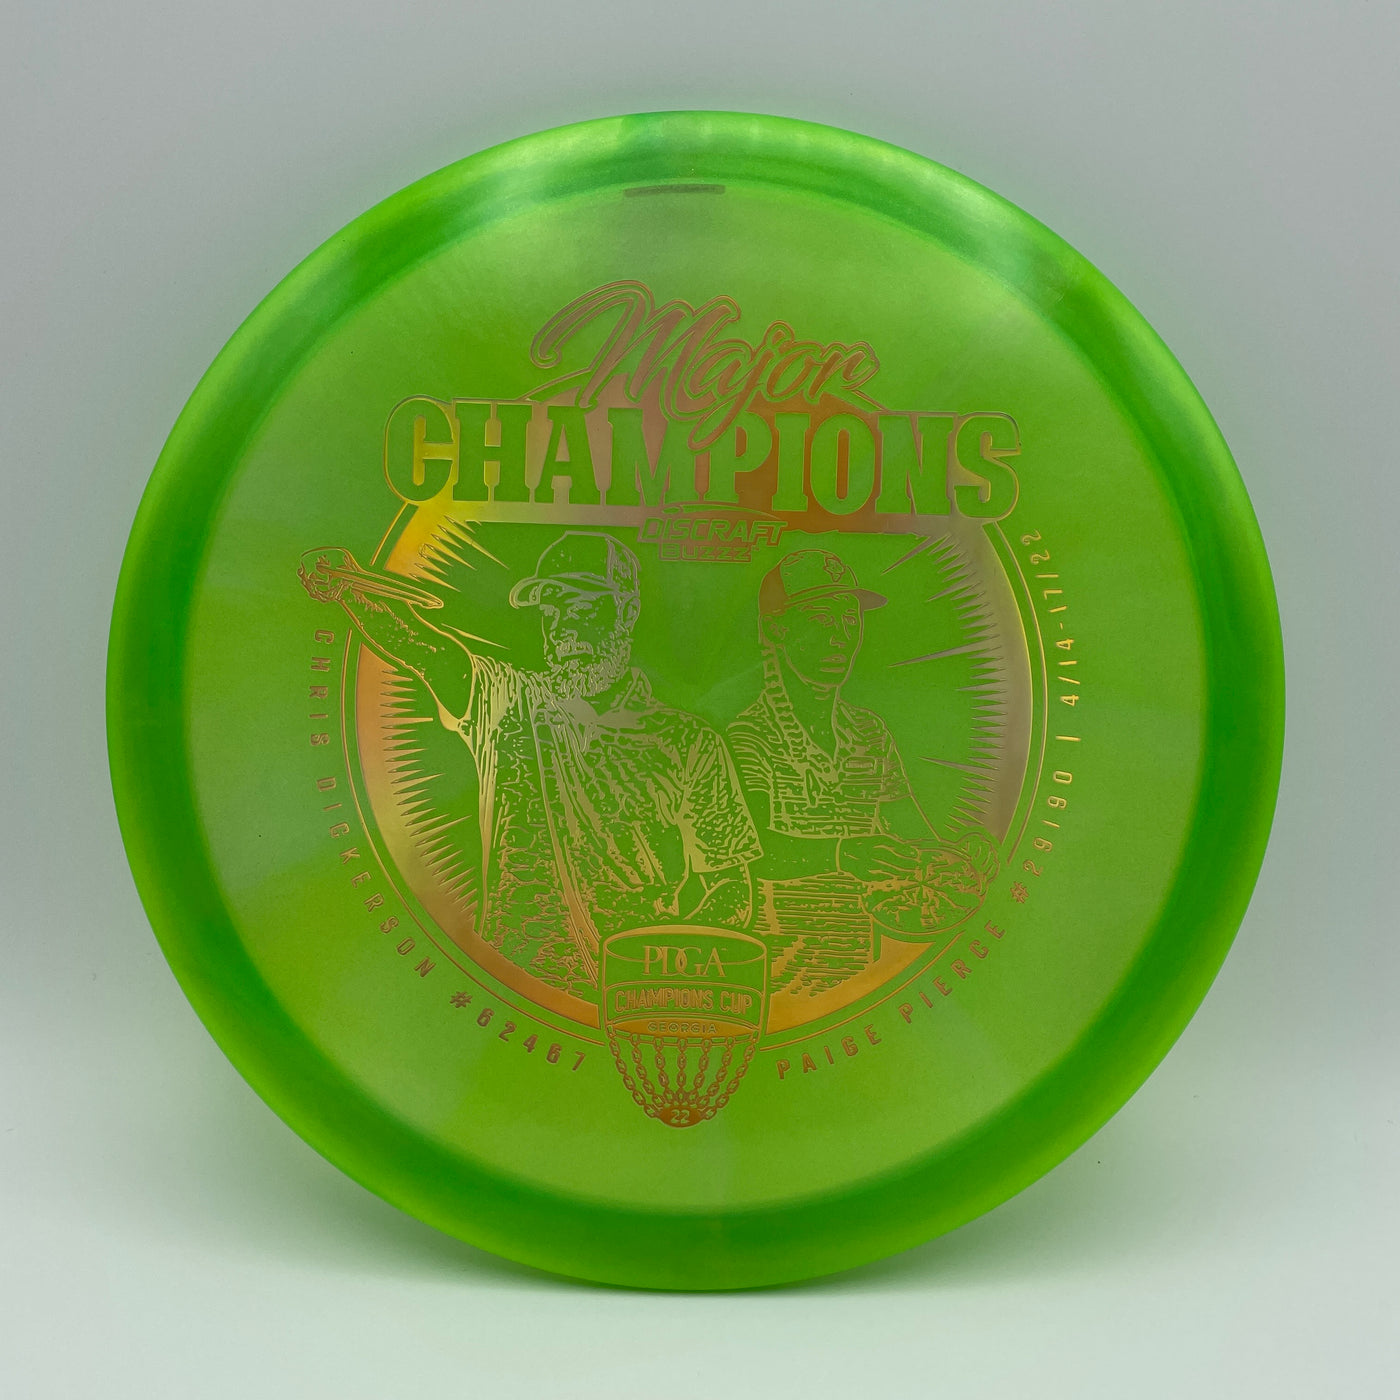 Limited Edition 2022 Champions Cup Buzzz